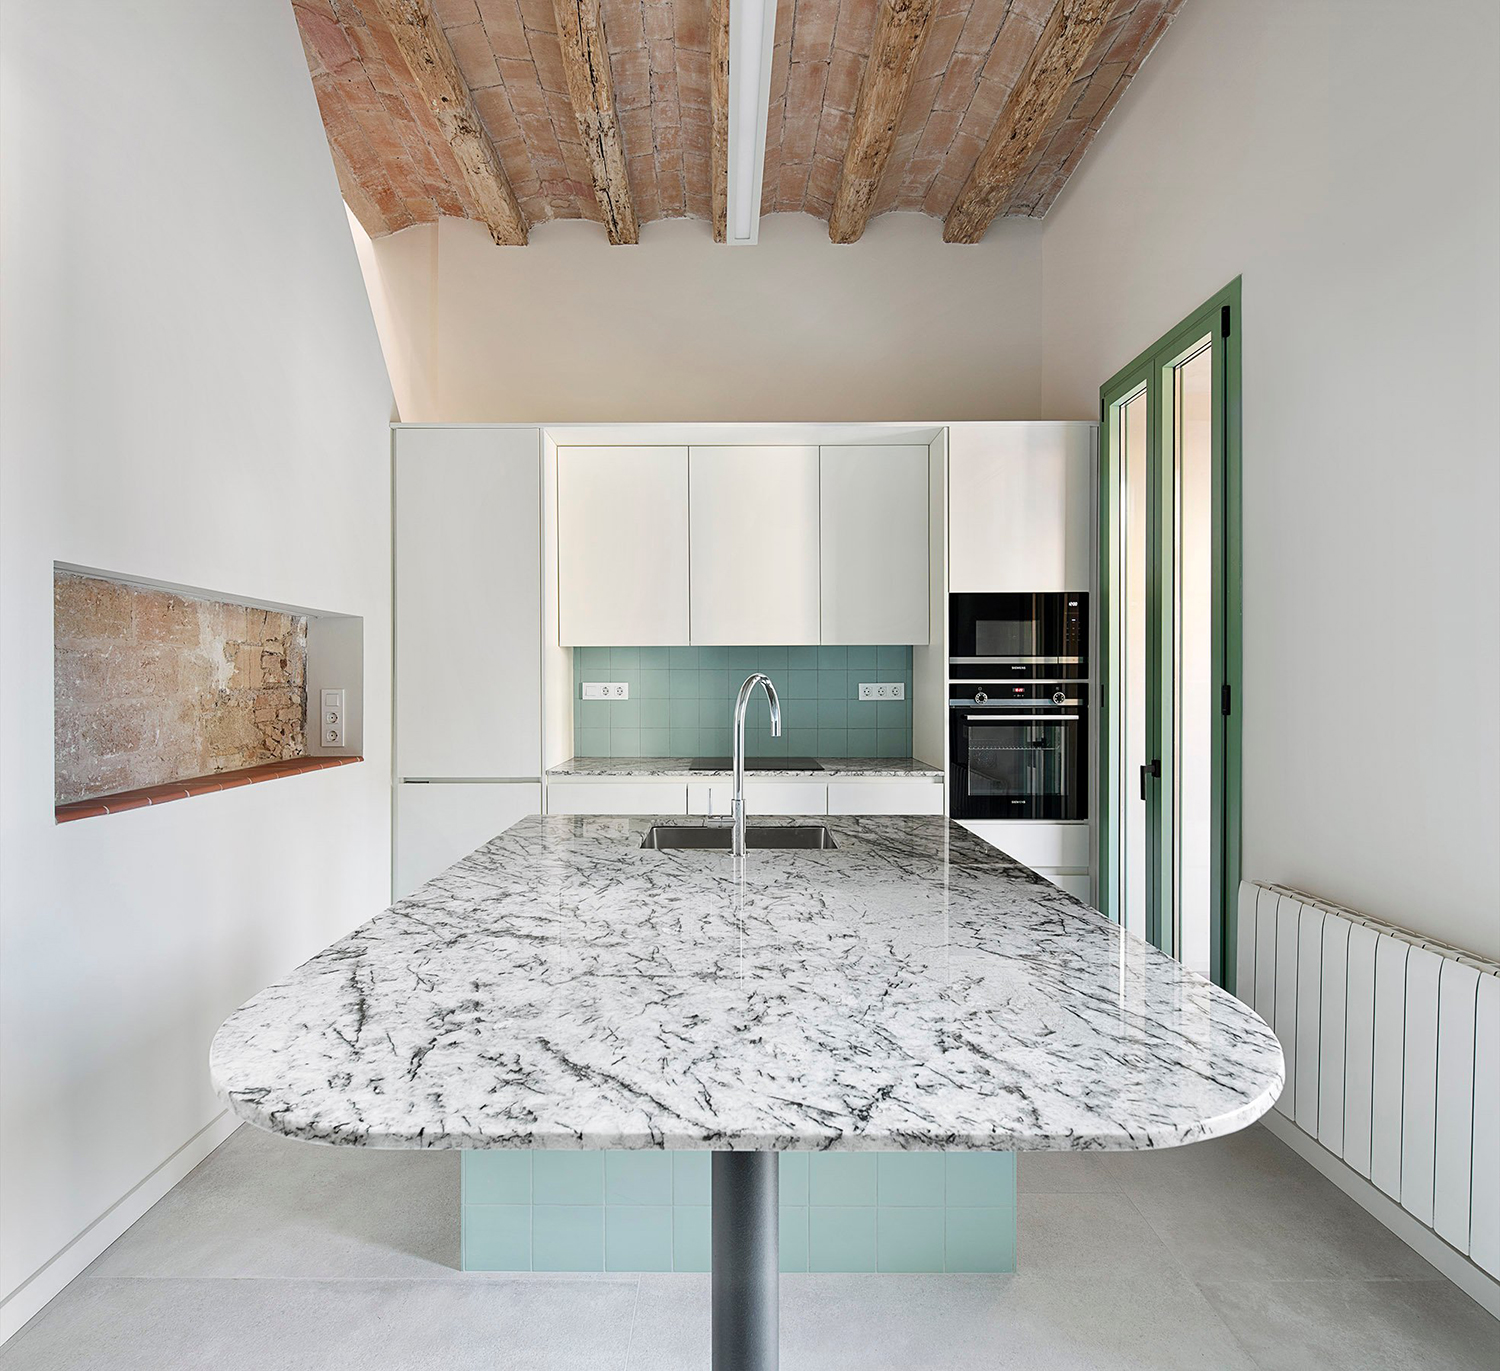 Kitchen with marble center island with sink